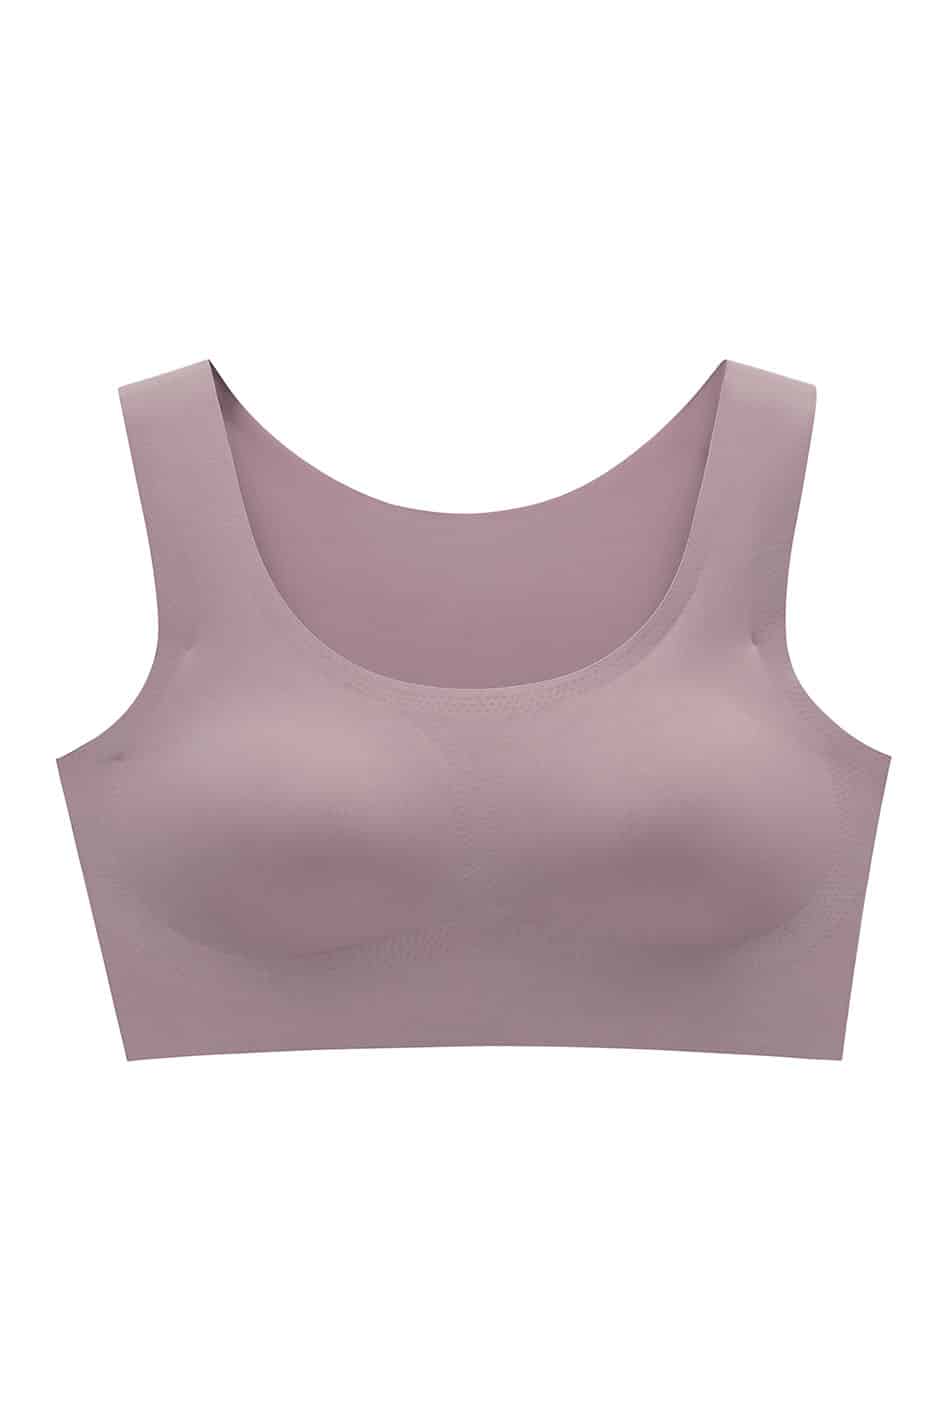 Anmose Sports Bras Tank top Low Back Sleep Bra Seamless Without